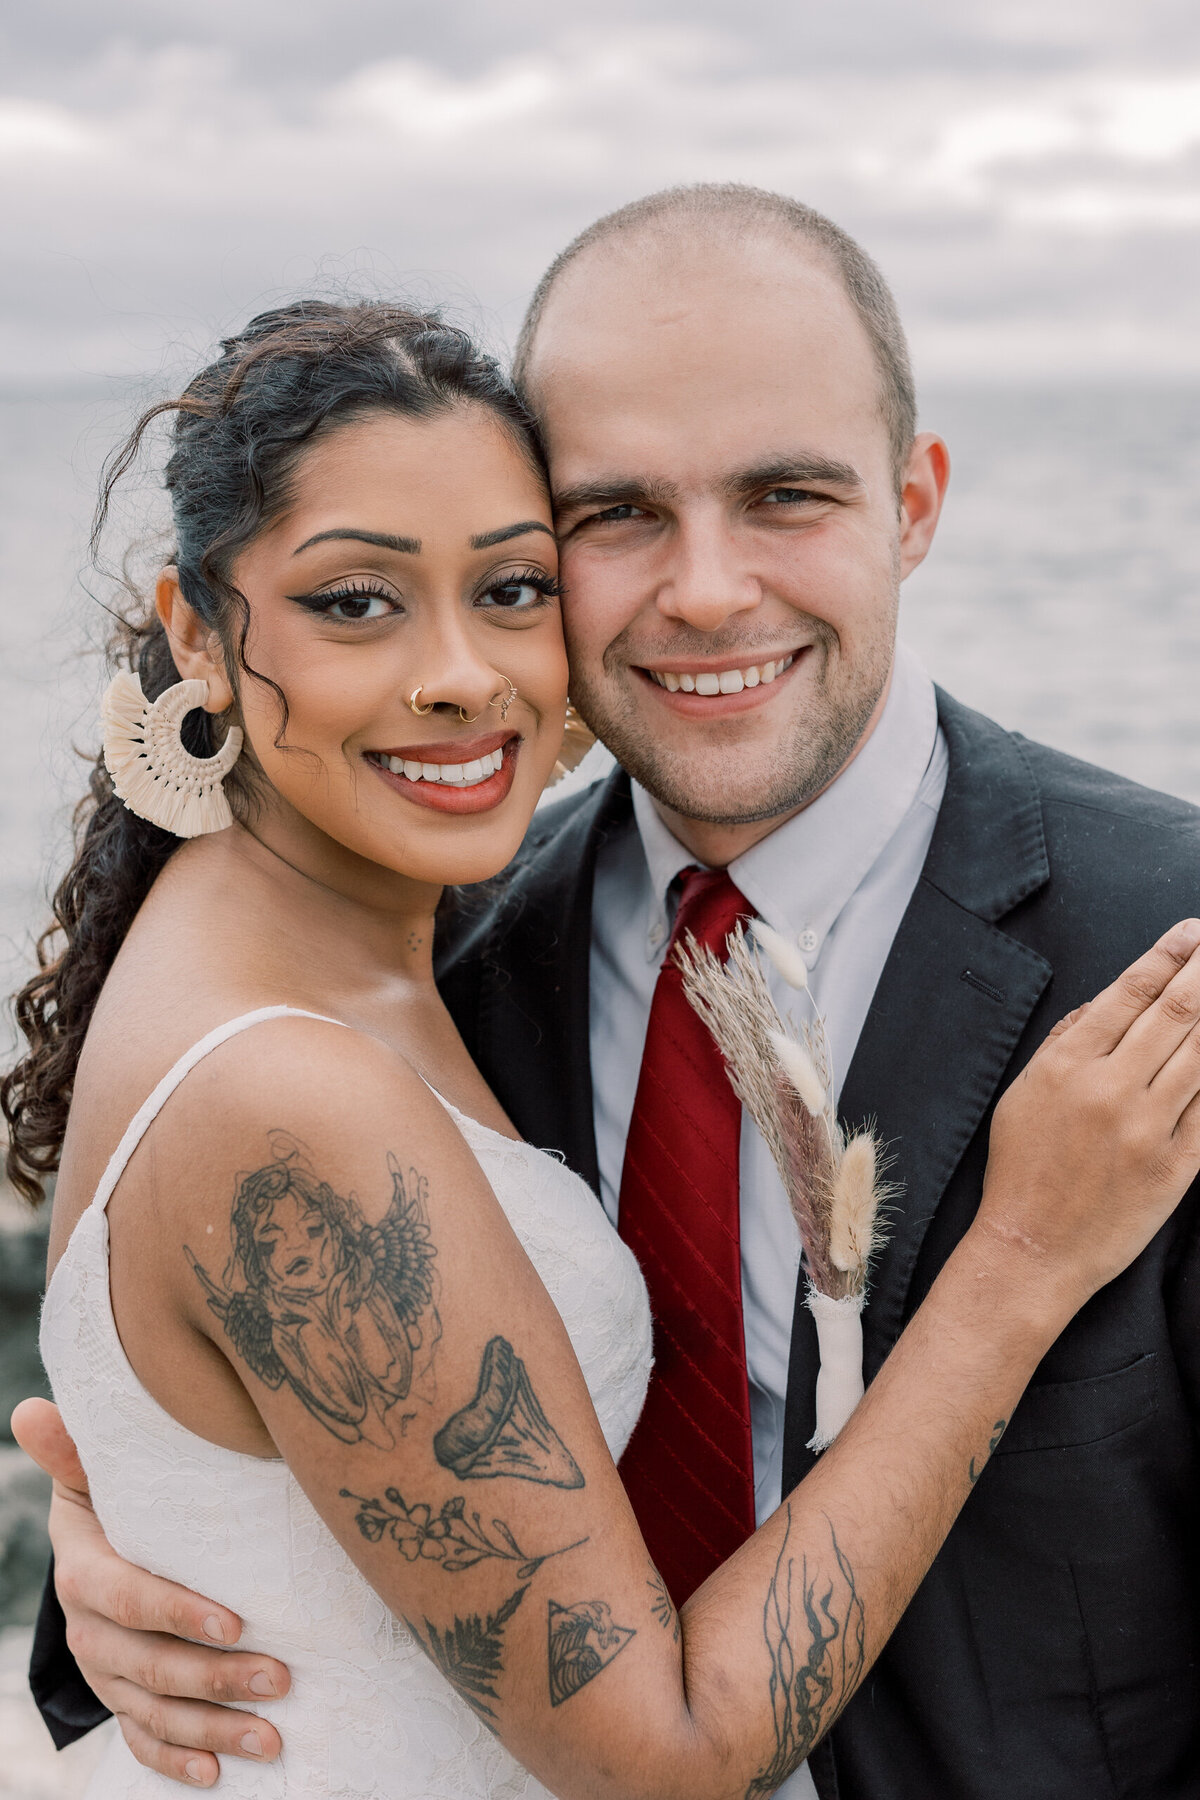 Interracial couple smiling cheek to cheek on their wedding day at a beach in Florida.